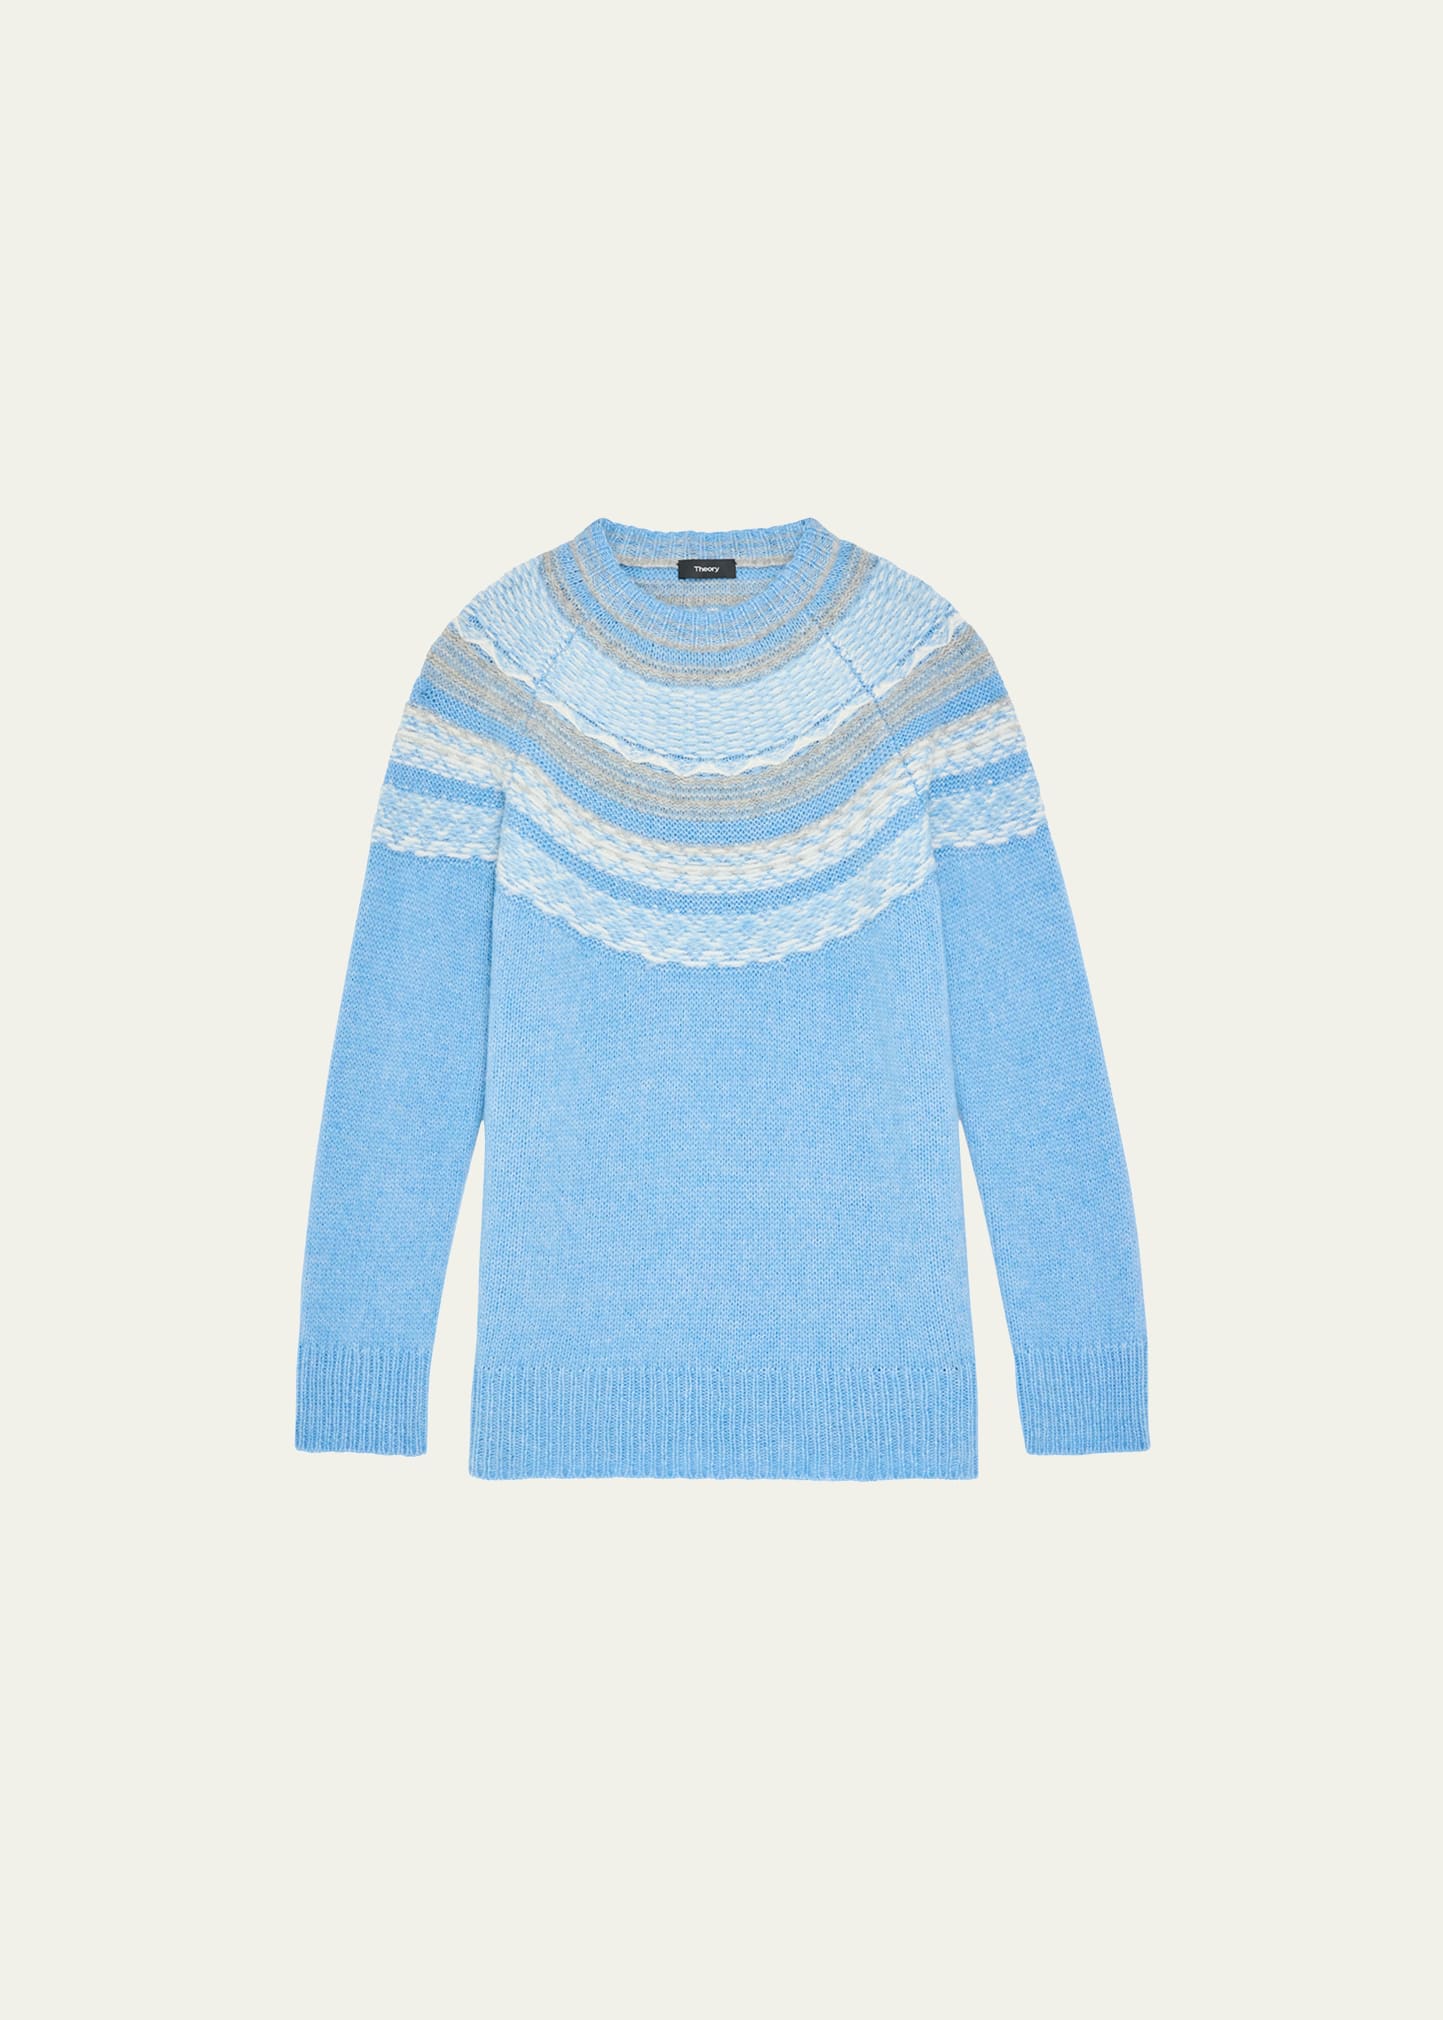 Theory Fair Isle Pullover Sweater In Winter Blue Multi